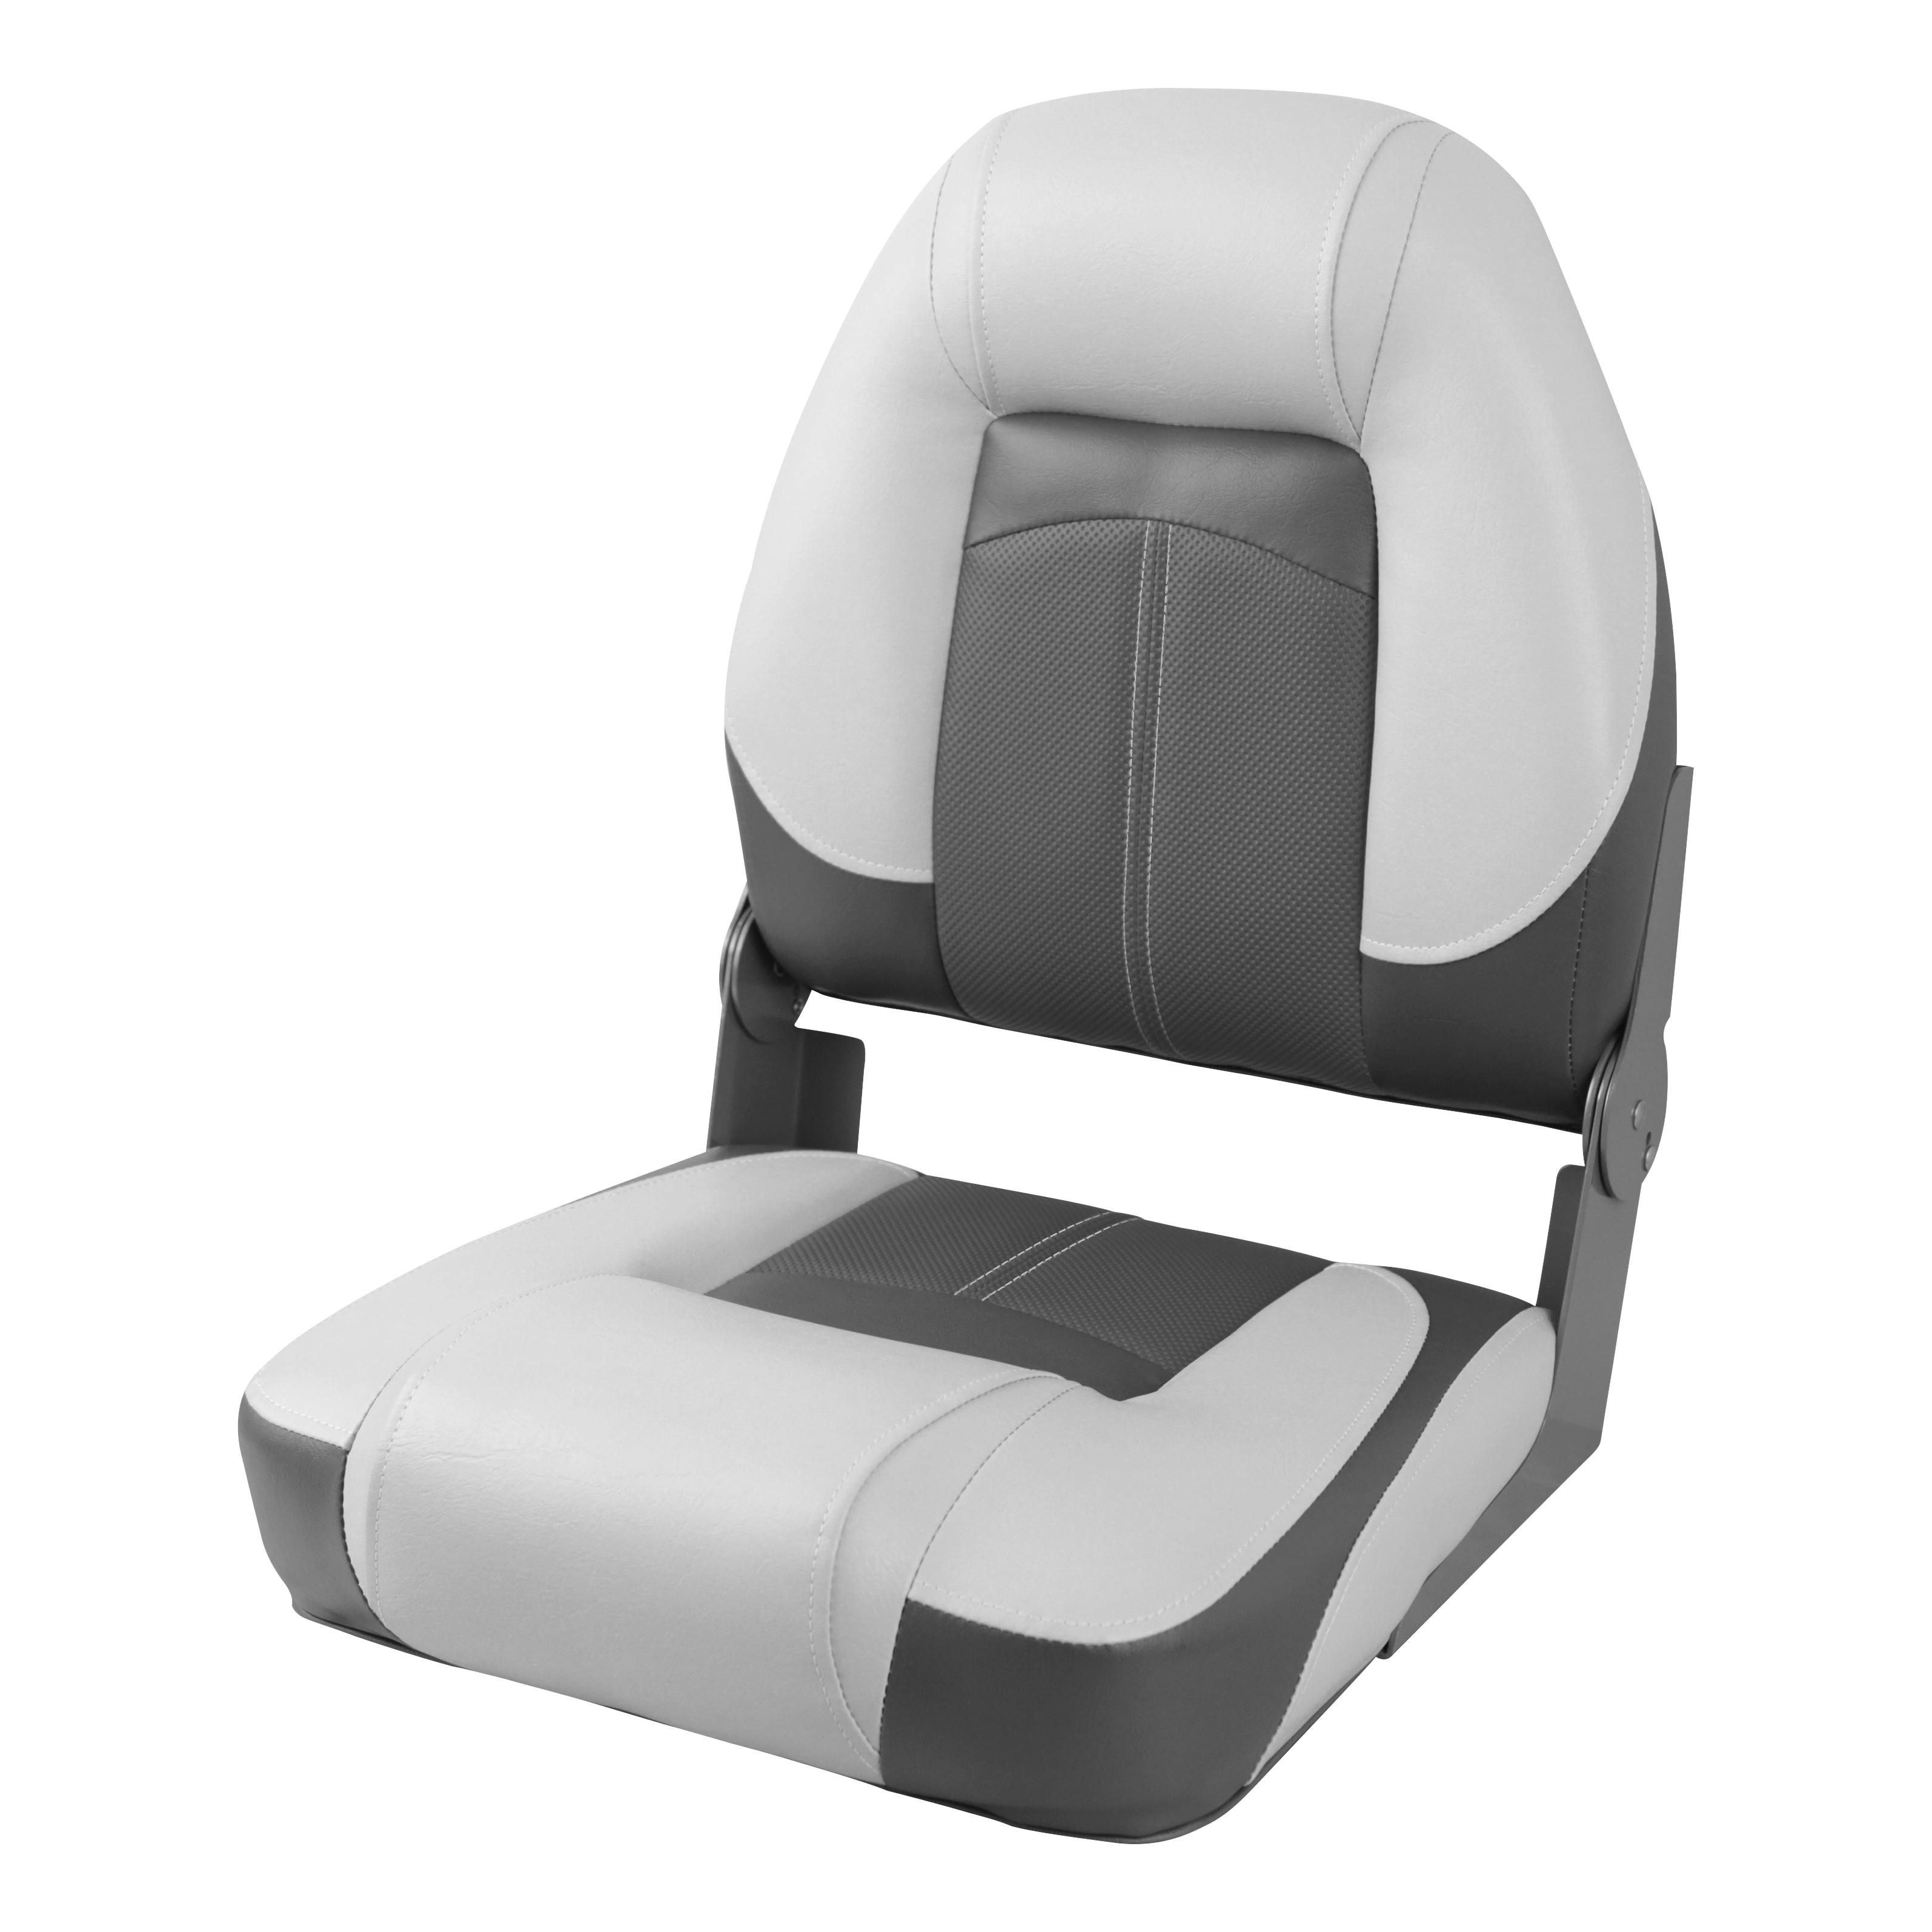 Bass Pro Shops® Pro Qualifier High-Back Boat Seat - Grey/Charcoal